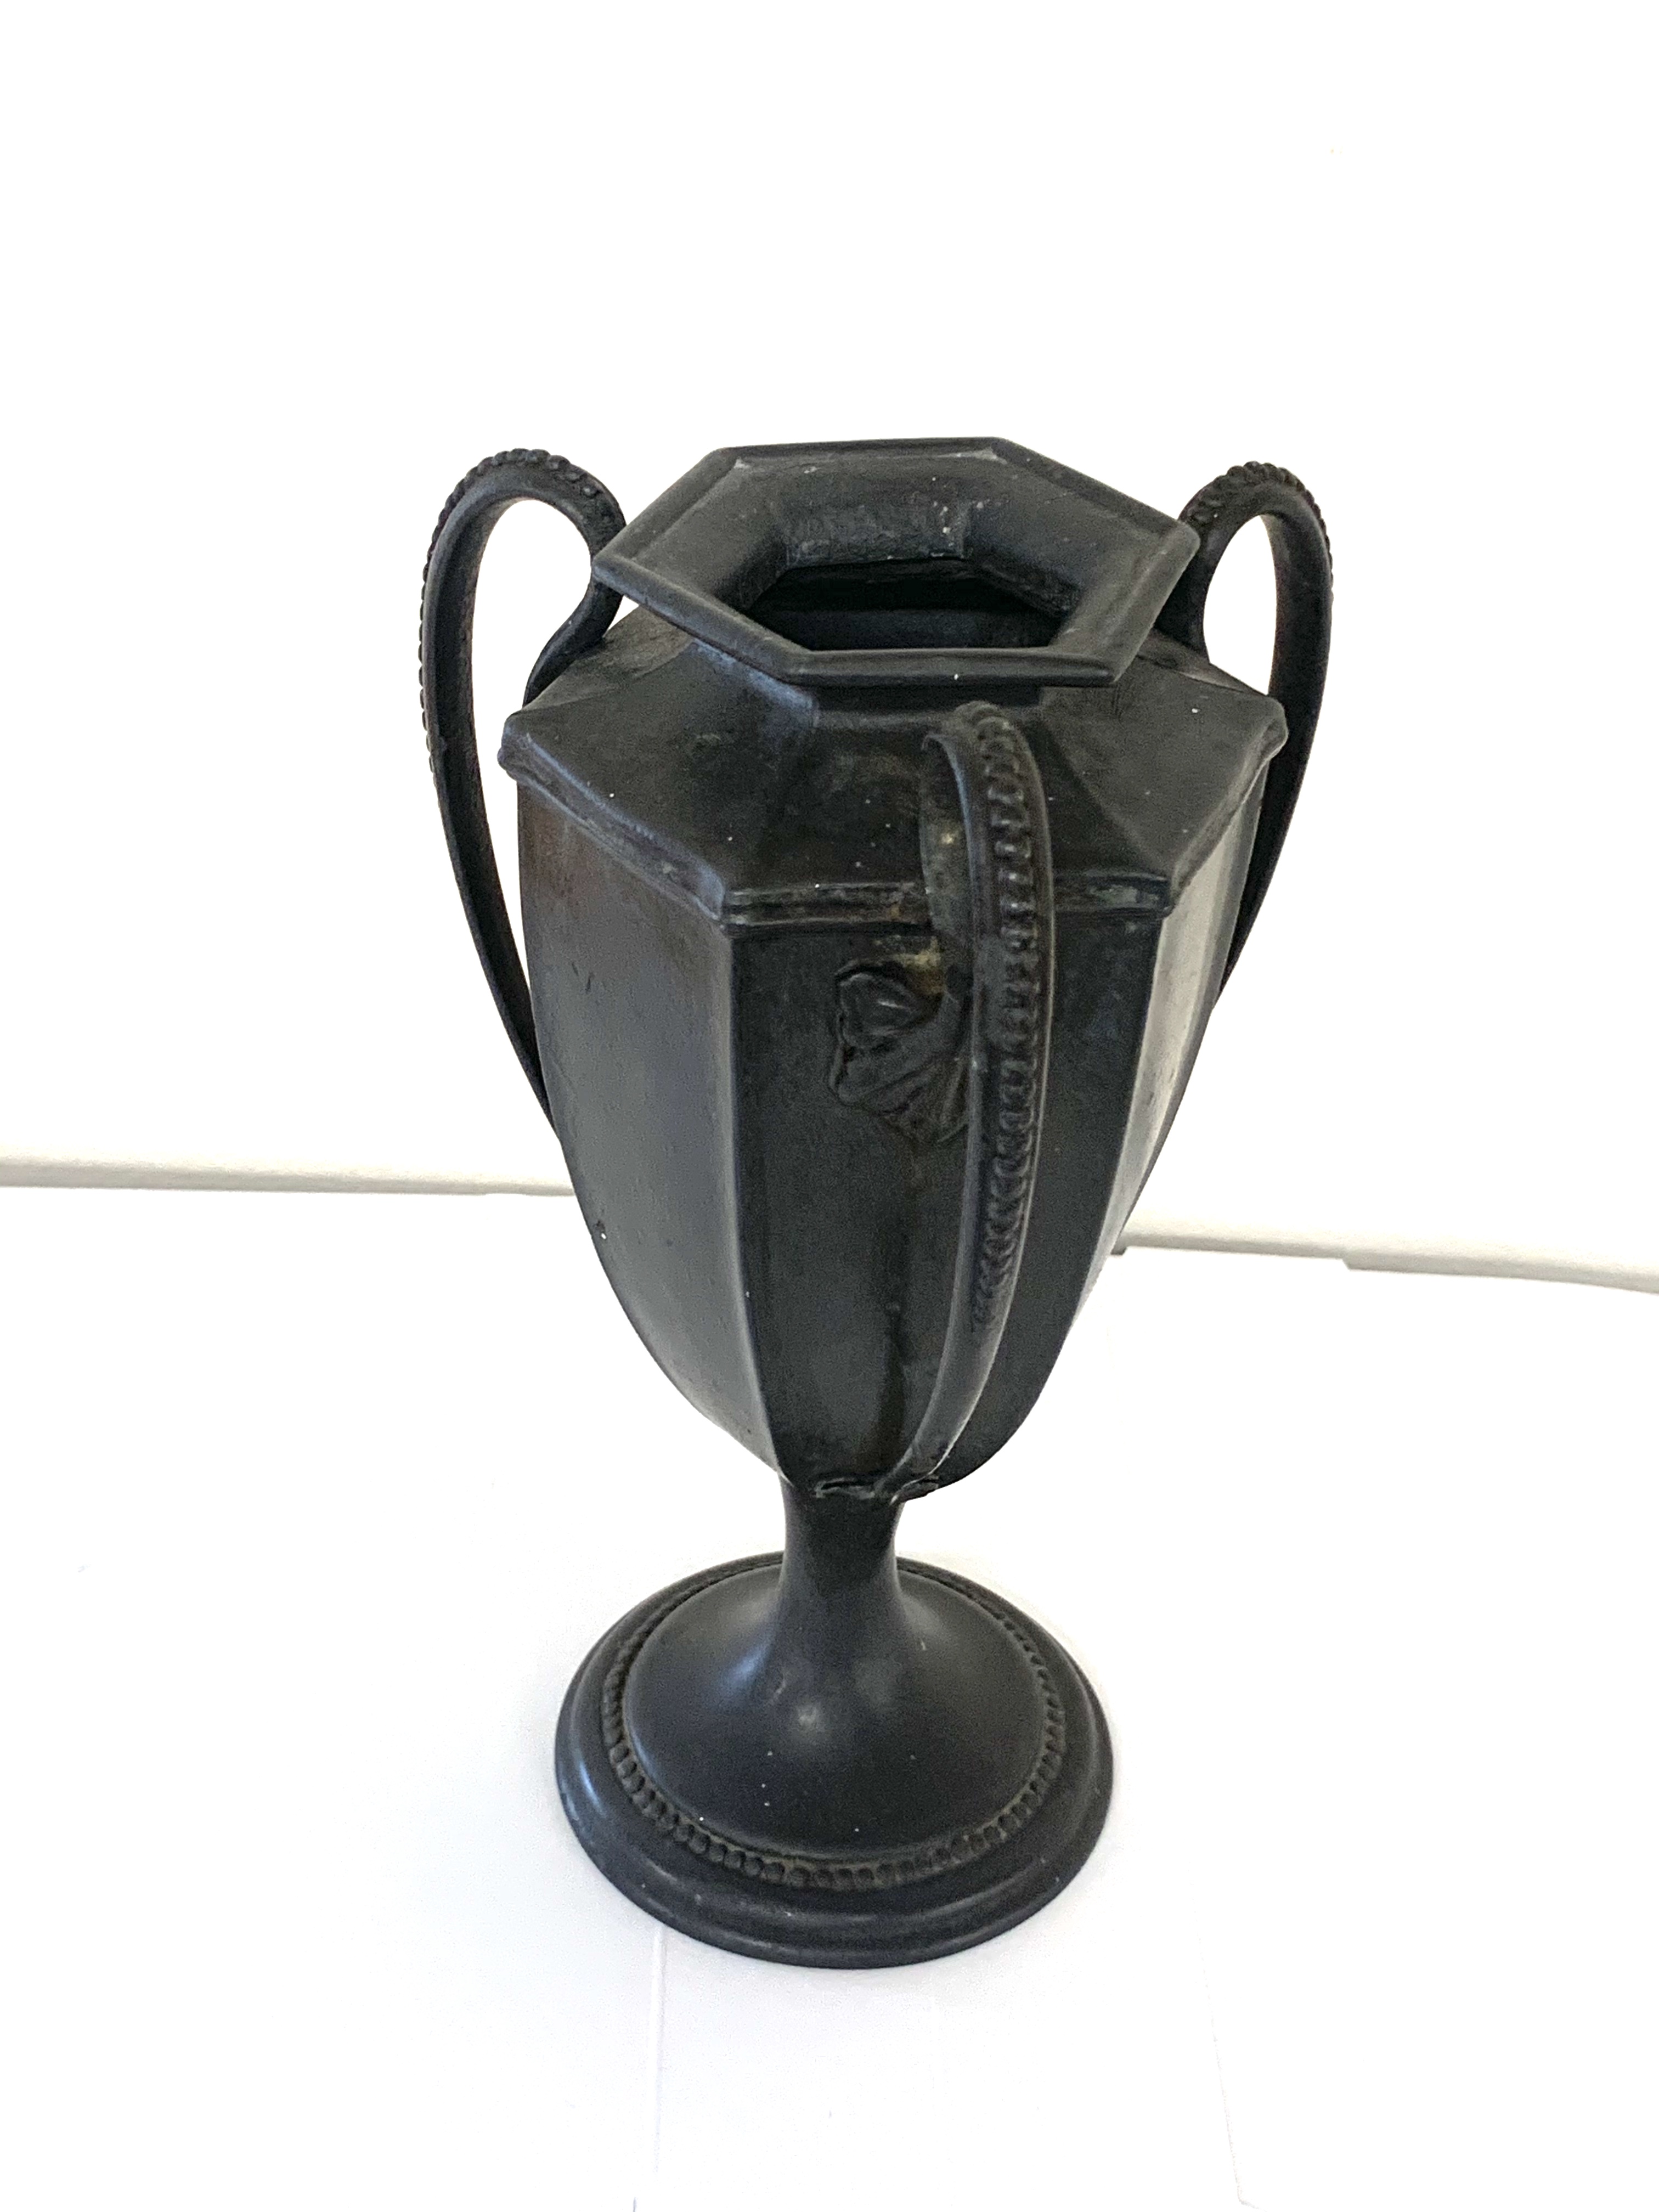 Tudric pewter vase from Liberty's London circa 1900 - Image 4 of 4